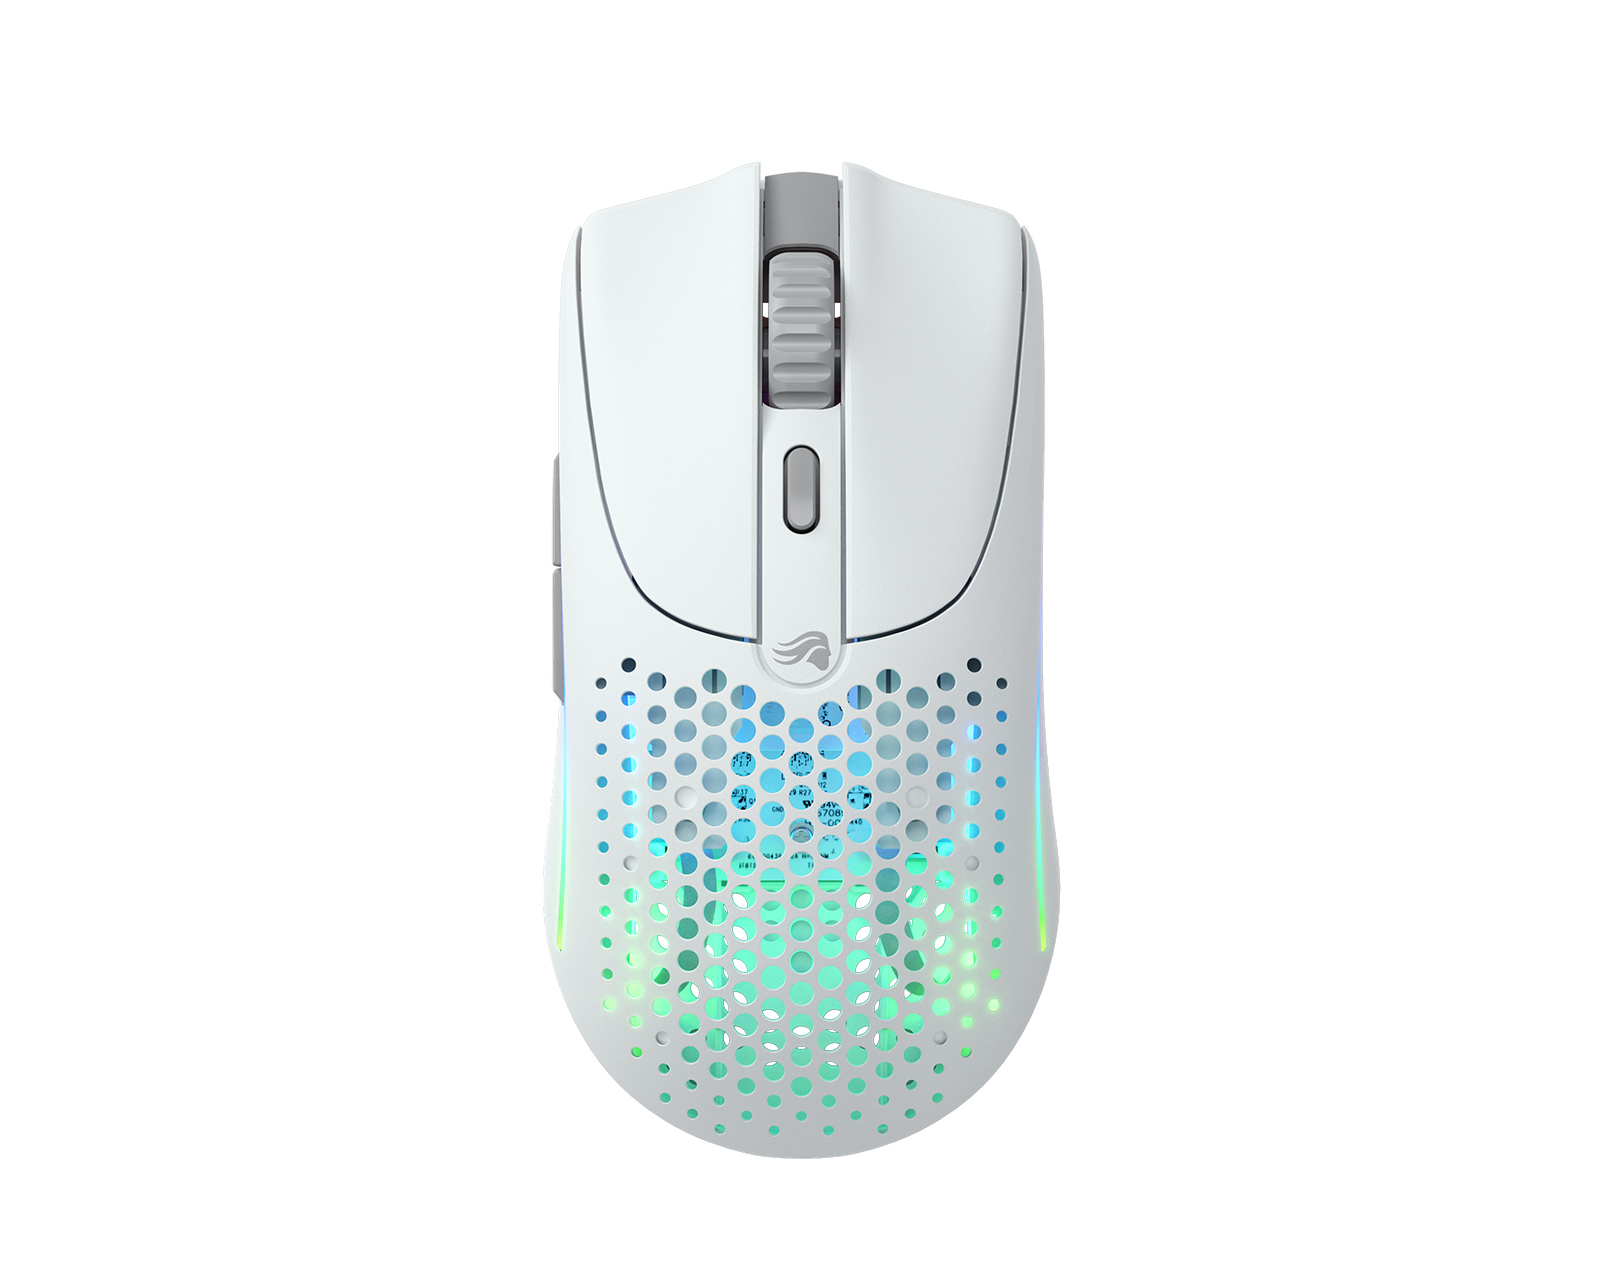 Model O 2 PRO - Professional Gaming Mouse - Glorious Gaming